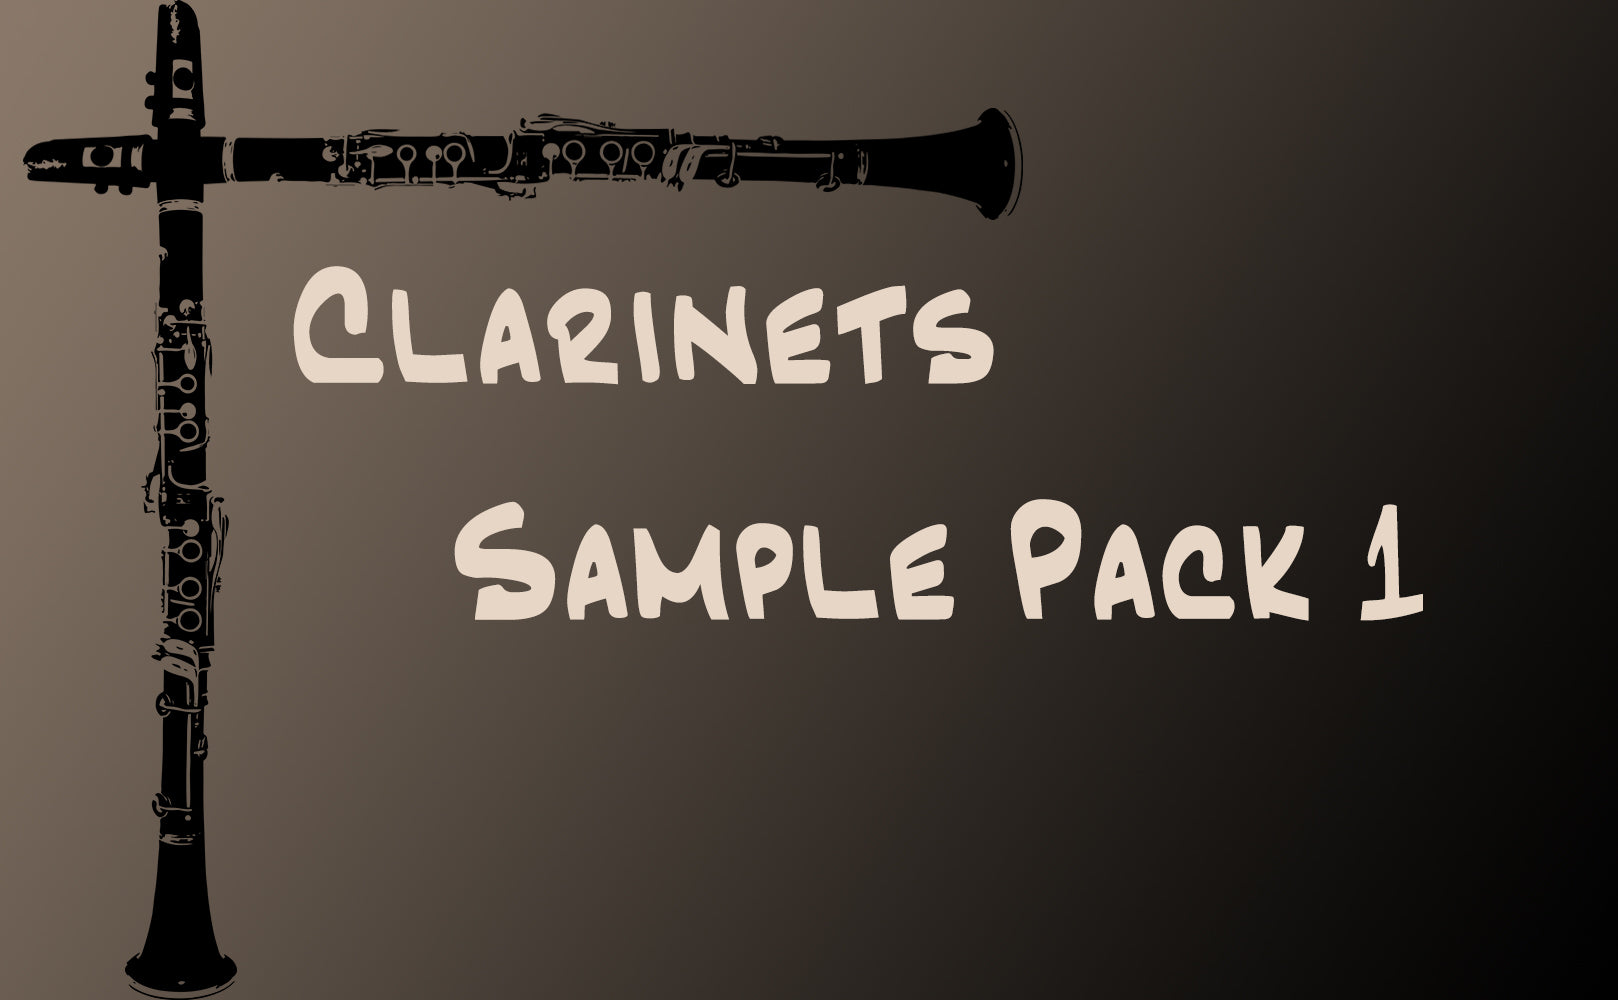 Clarinets Sample Pack 1 - Click to Listen